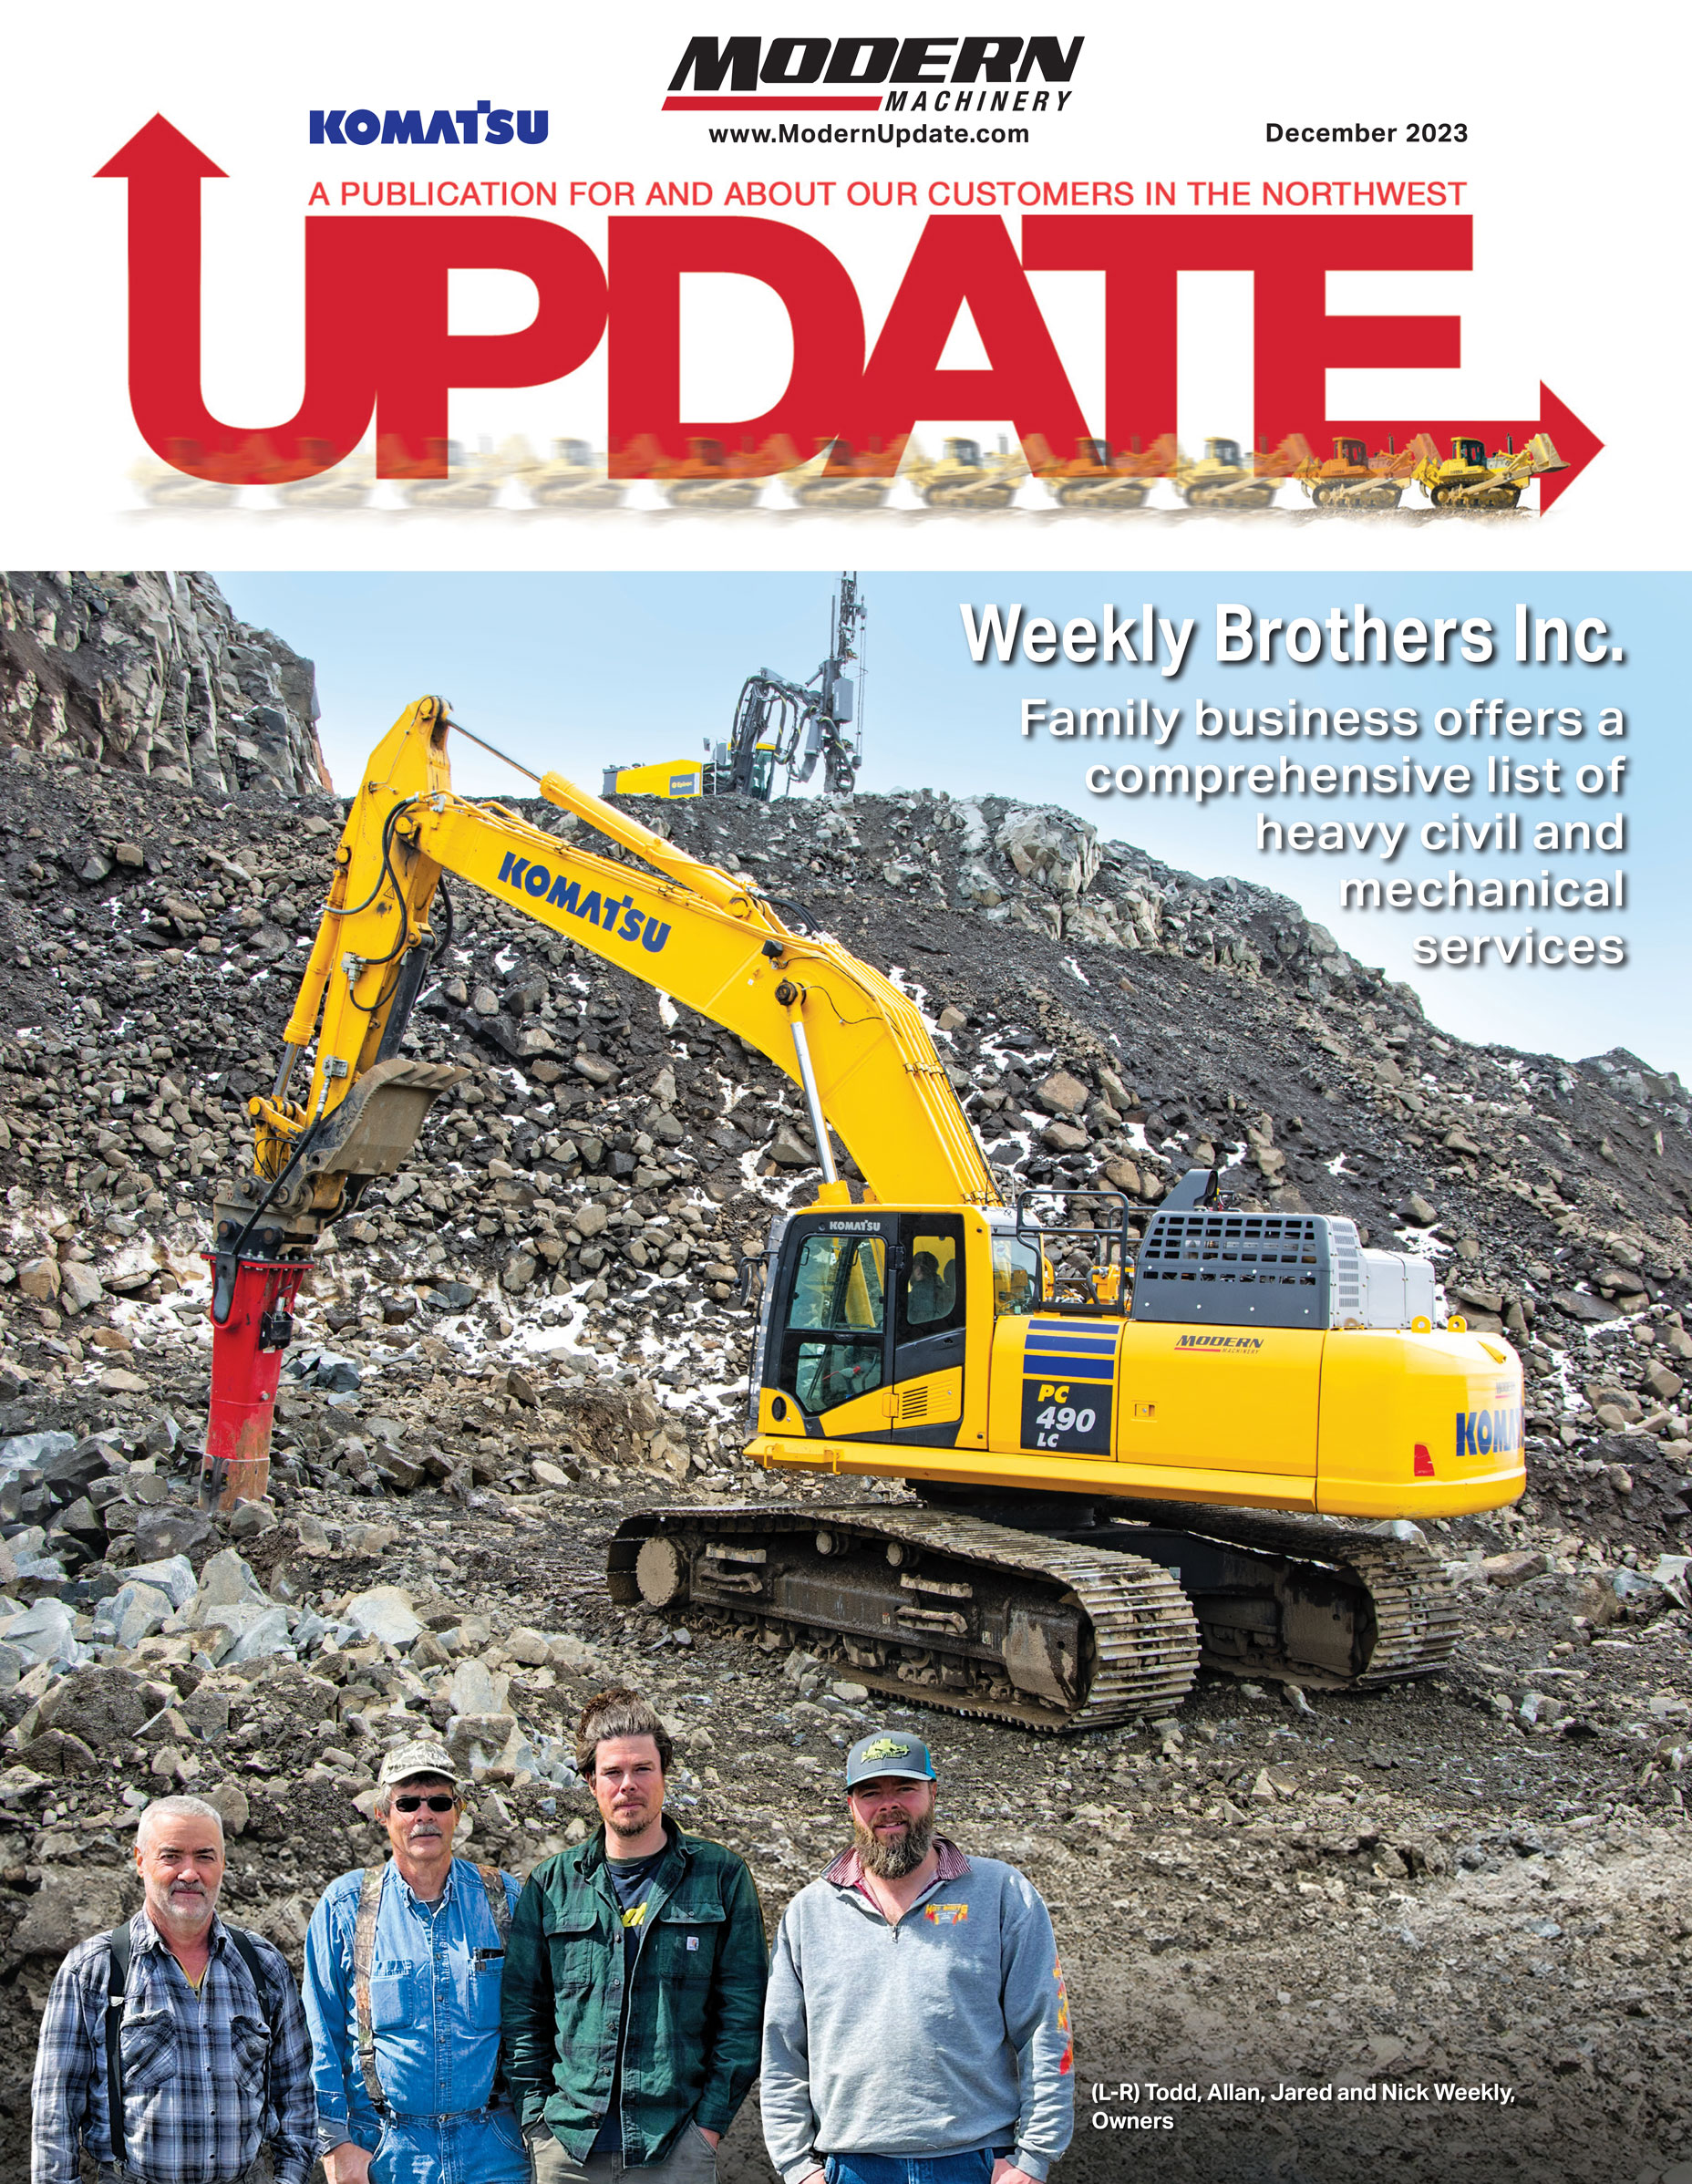 Content creation example of the front cover of a Modern Update magazine featuring Weekly Brothers Inc.